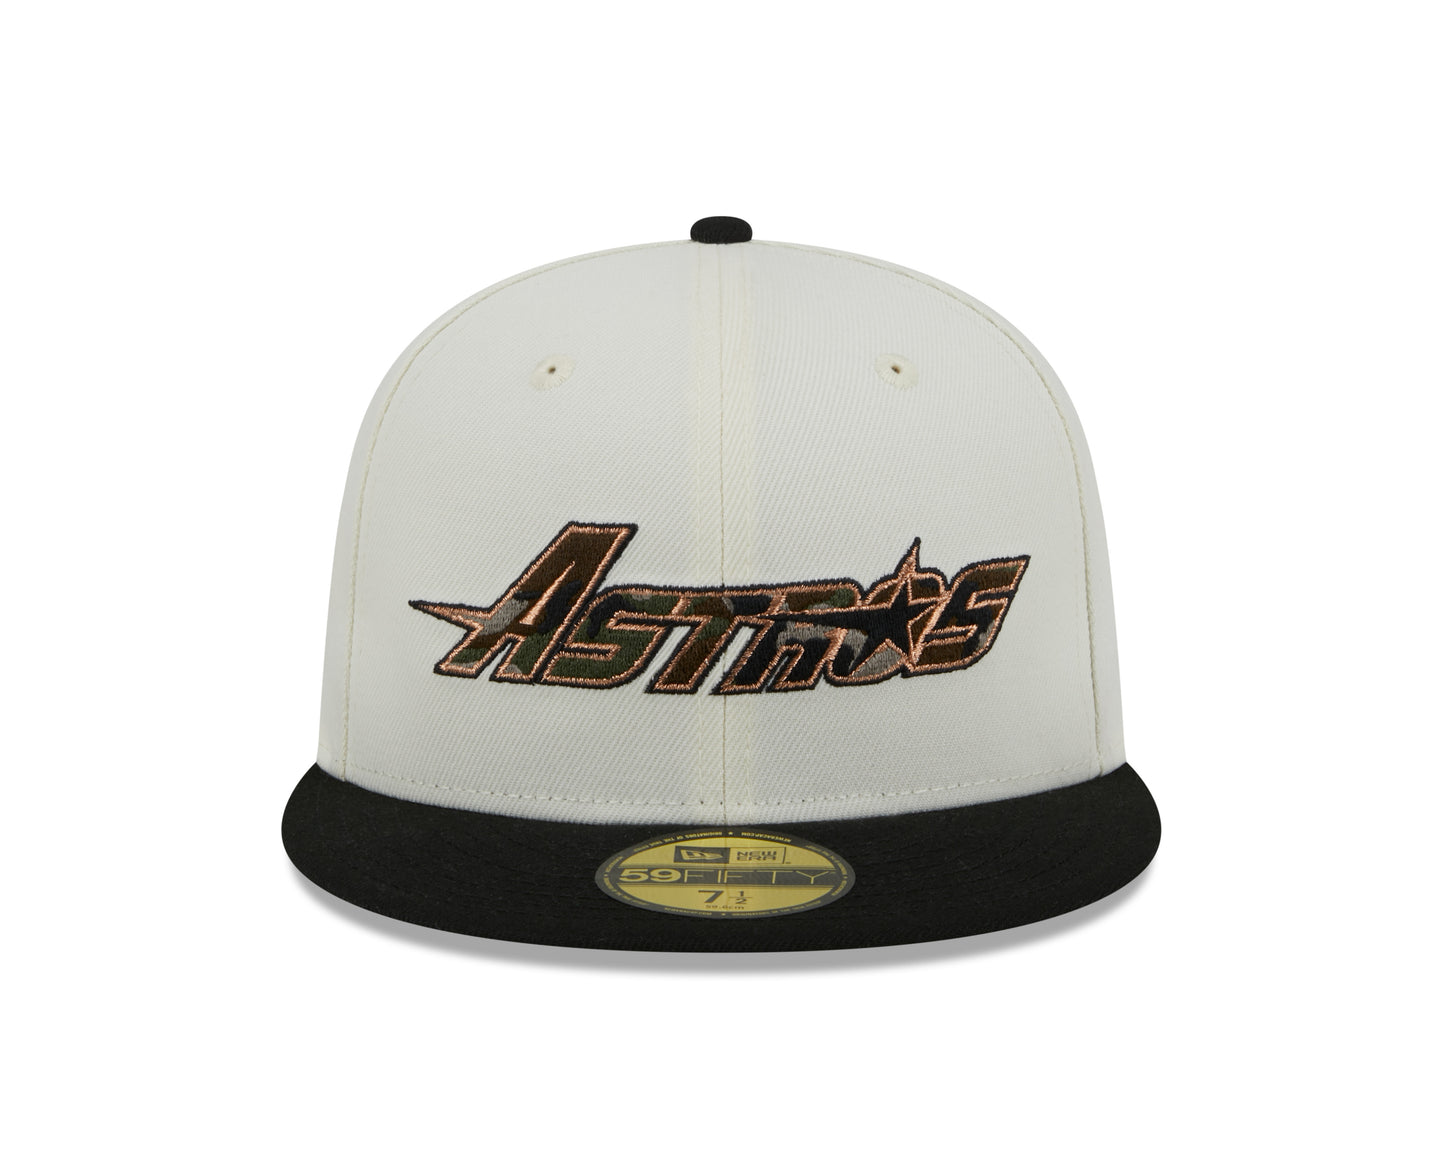 New Era - CAMO FILL - 59fifty Fitted Cap - Houston Astros - White - Headz Up 